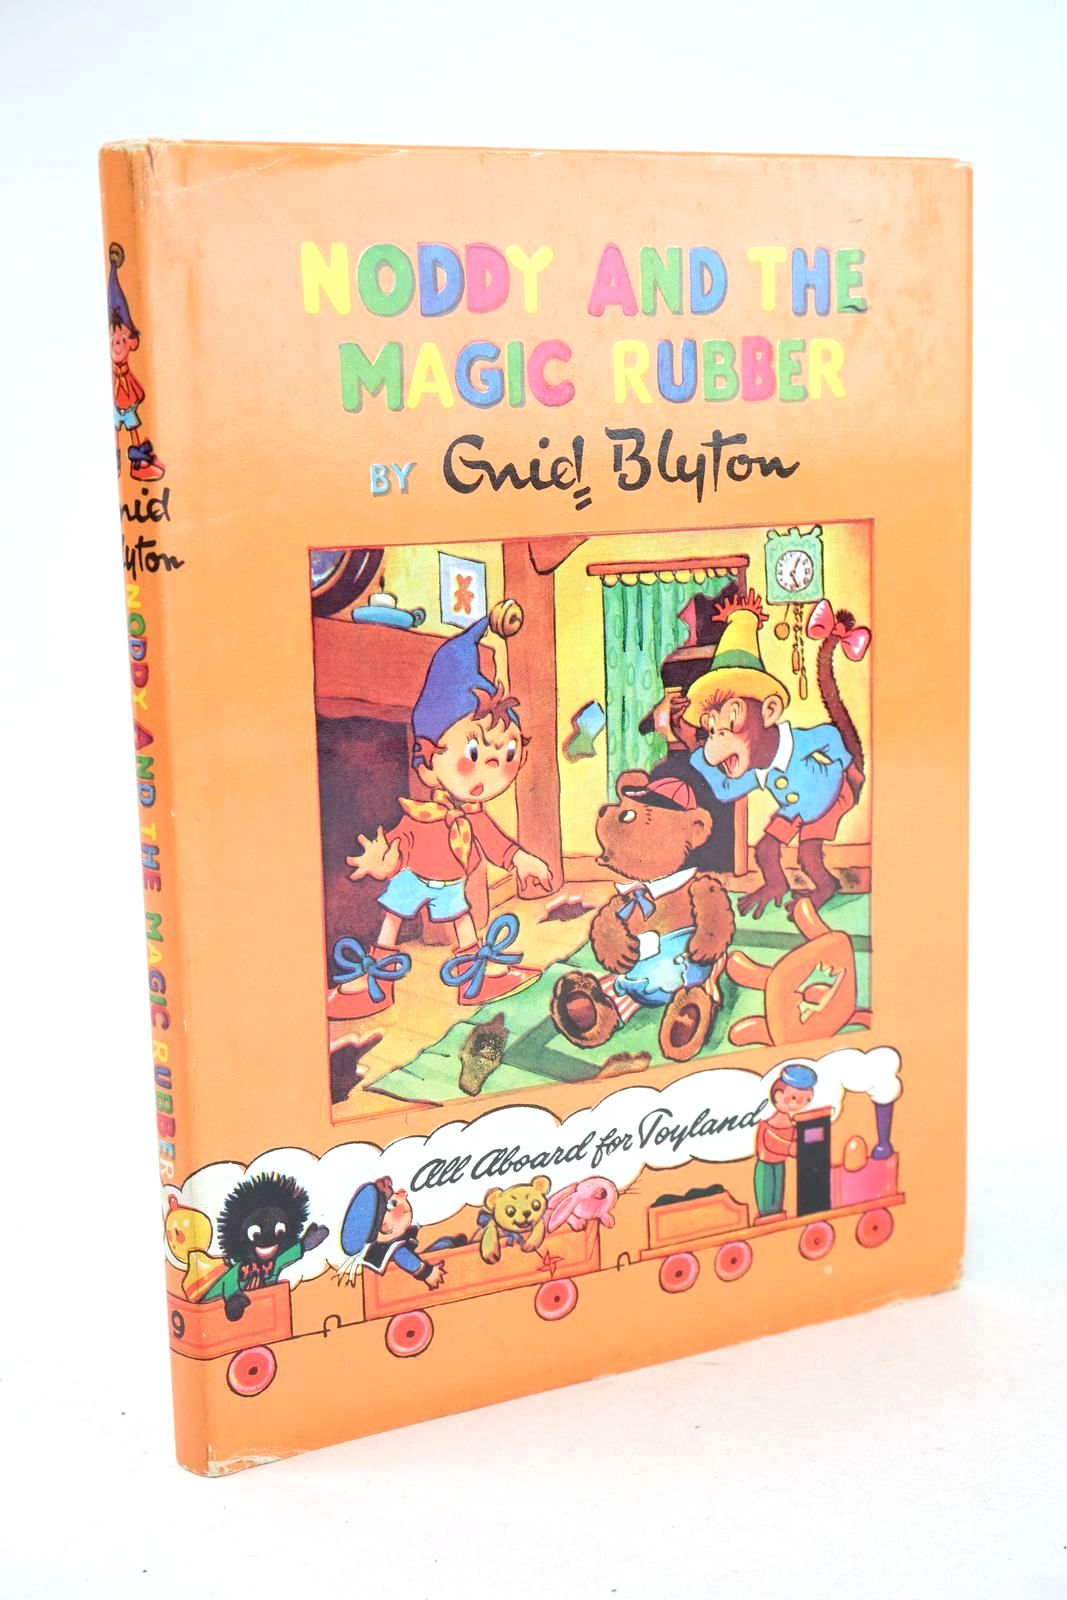 Stella Rose S Books NODDY AND THE MAGIC RUBBER Written By Enid Blyton STOCK CODE